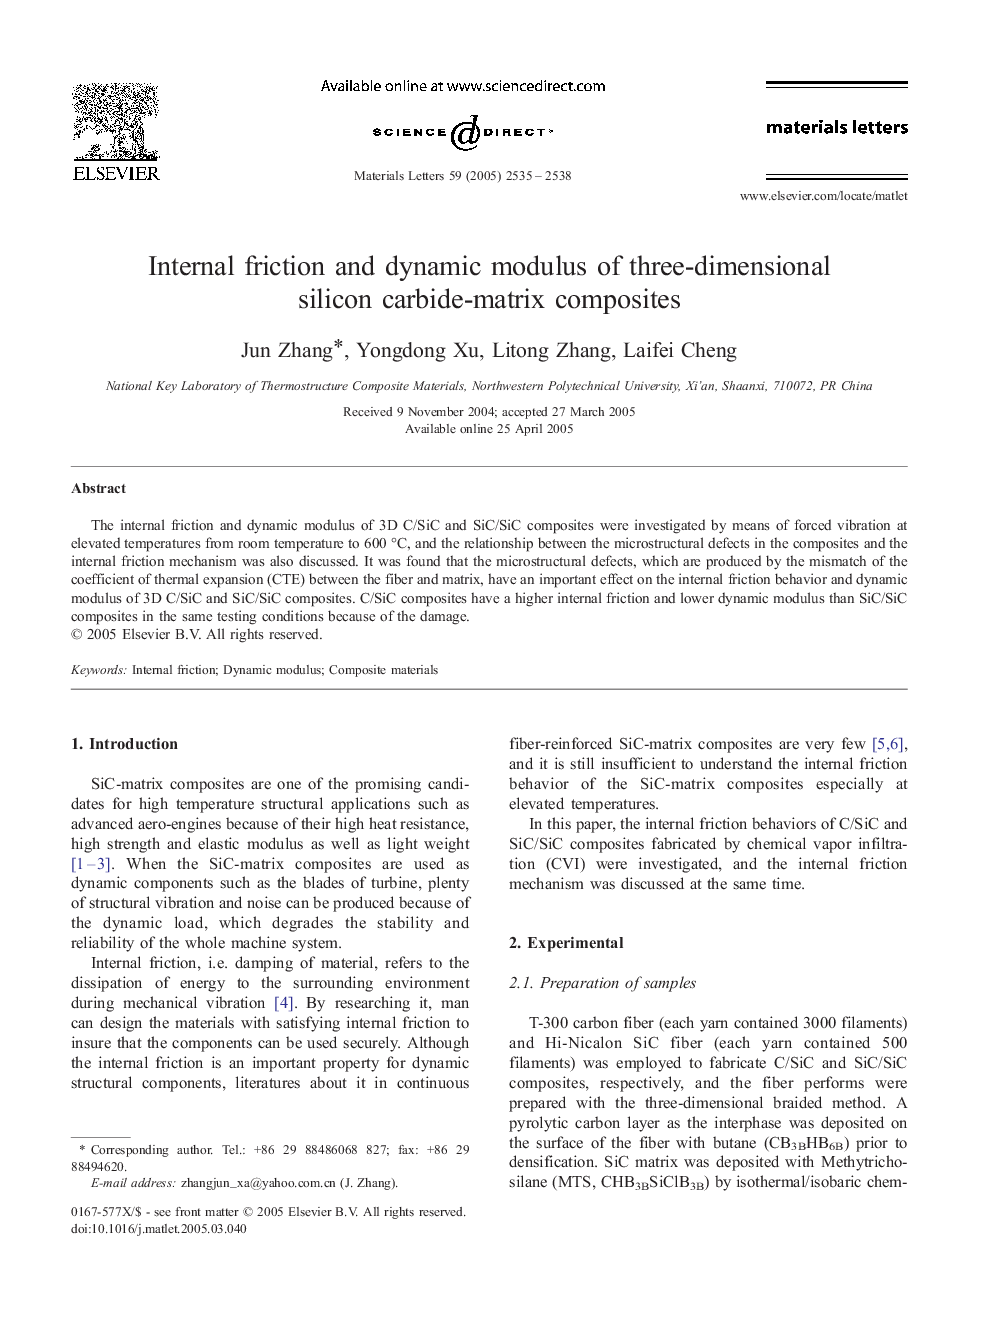 Internal friction and dynamic modulus of three-dimensional silicon carbide-matrix composites